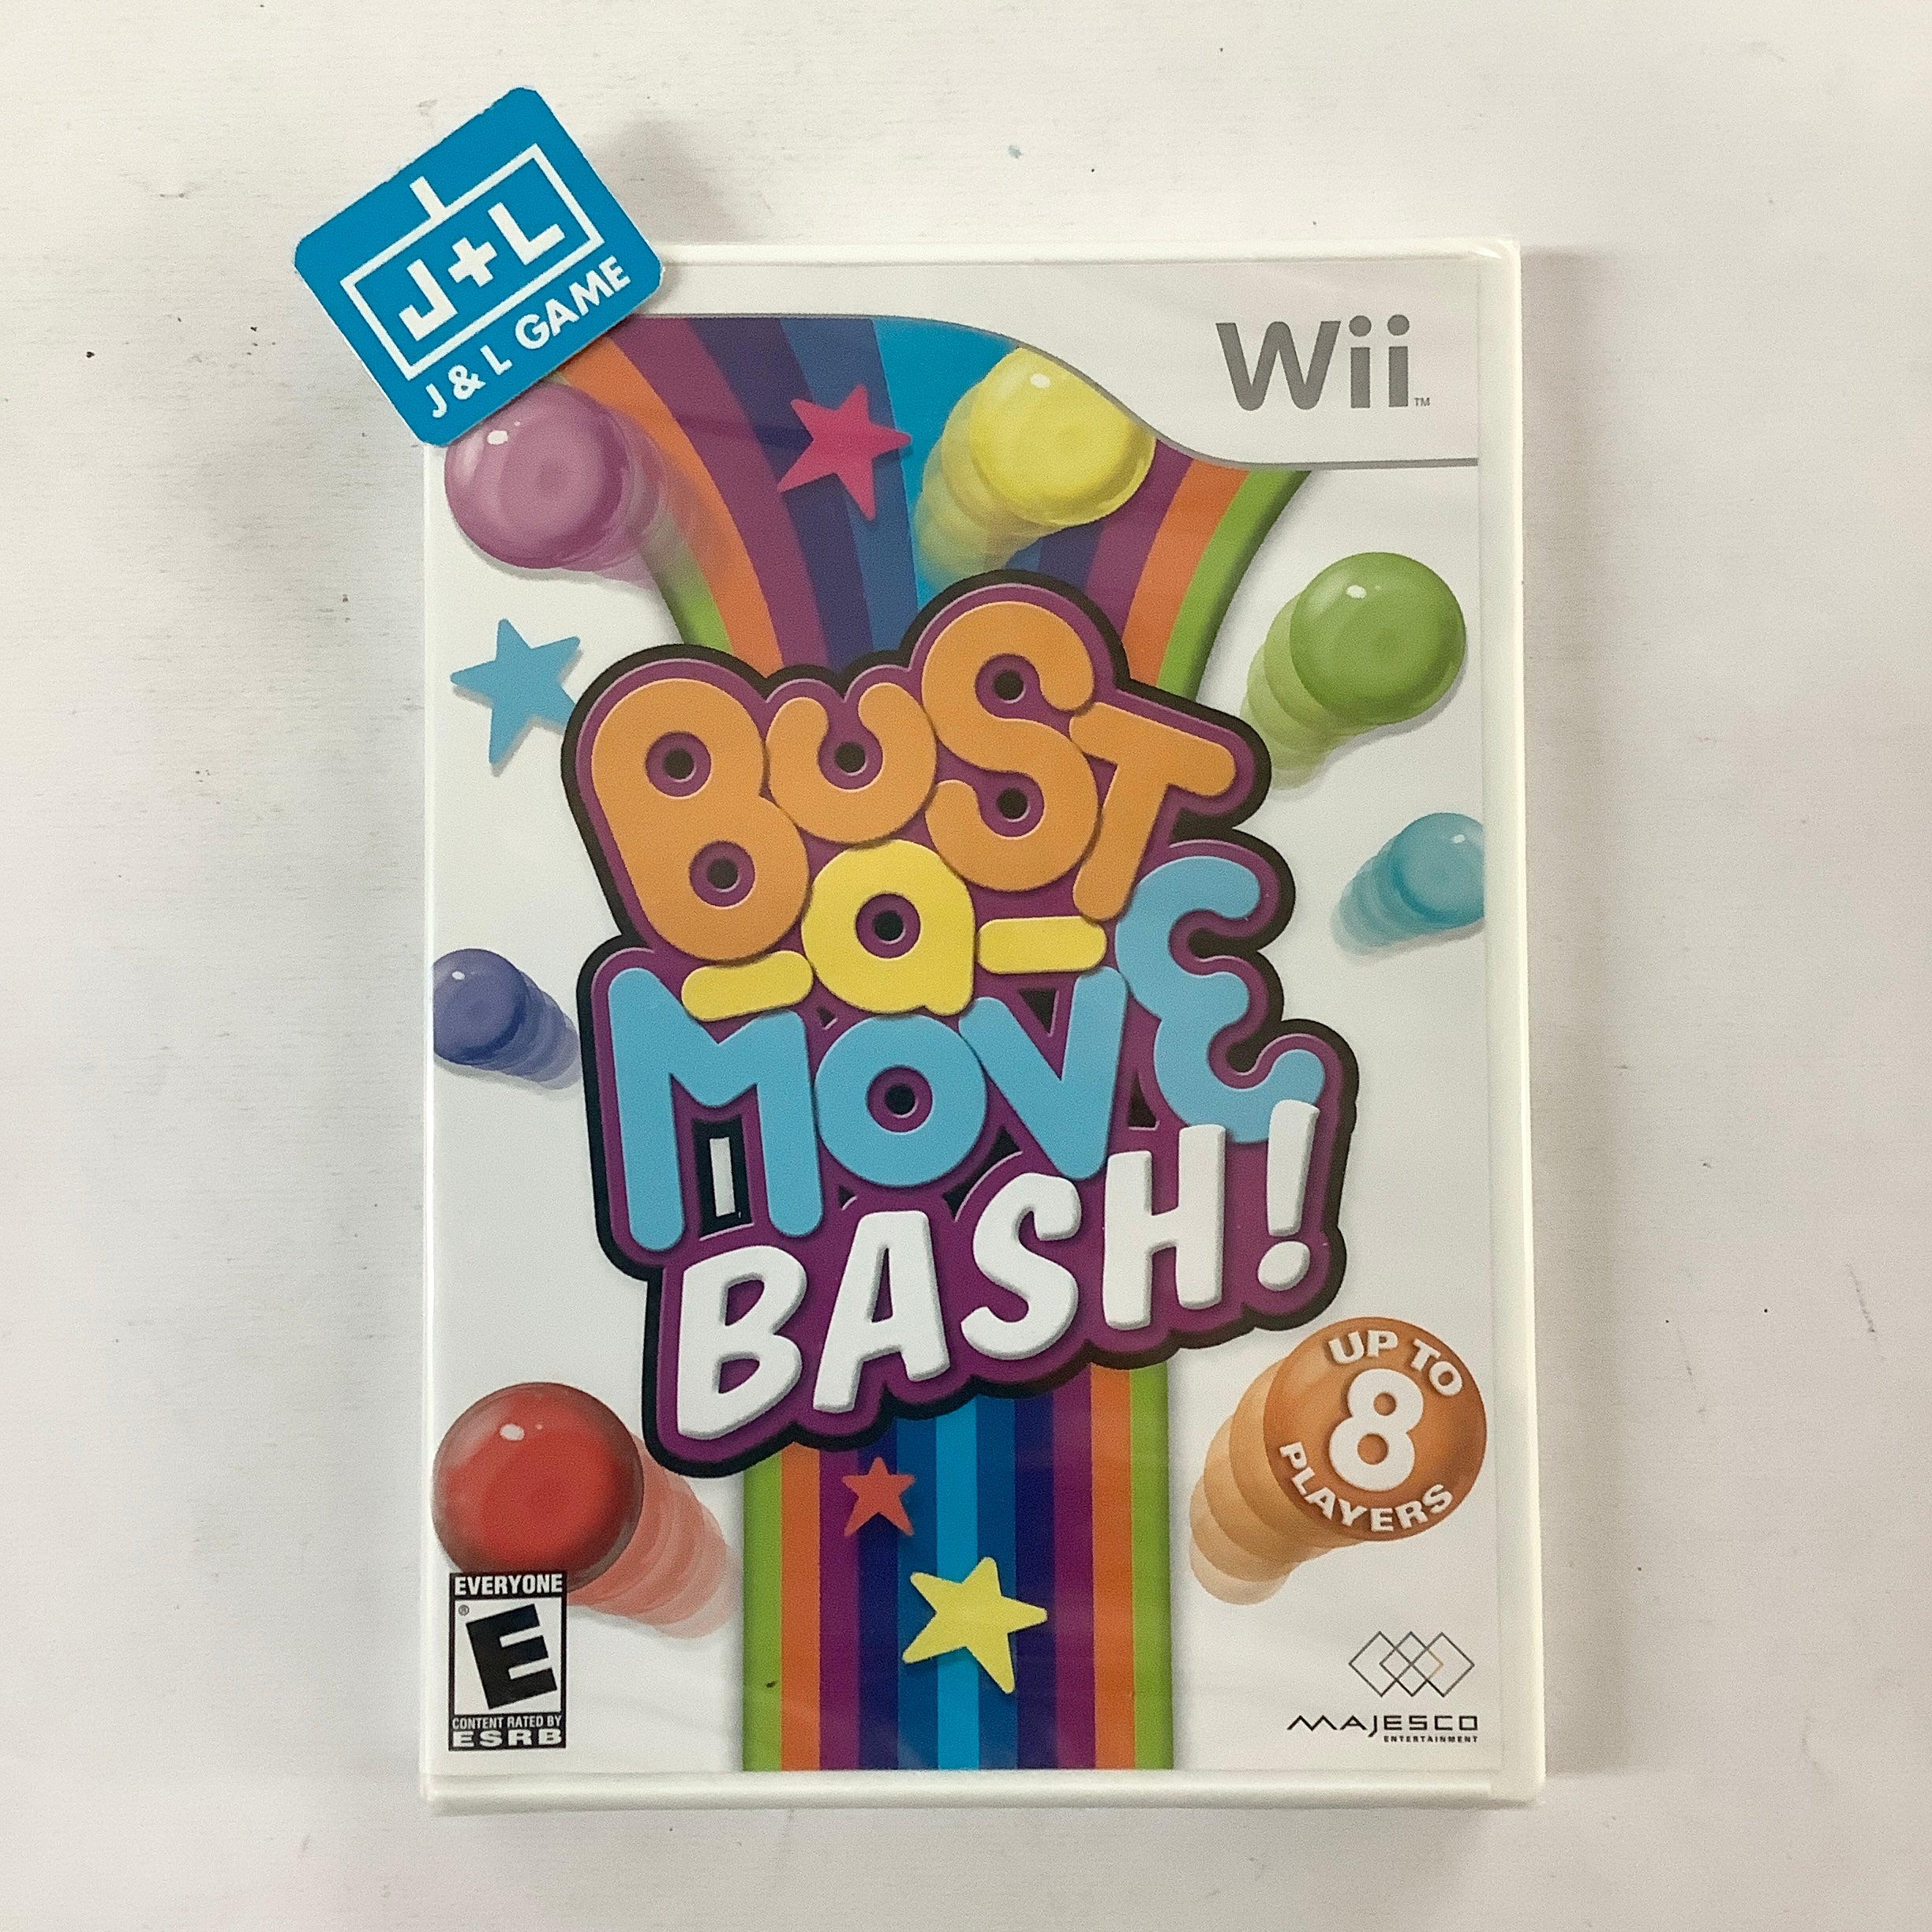 Bust-A-Move Bash! - Nintendo Wii